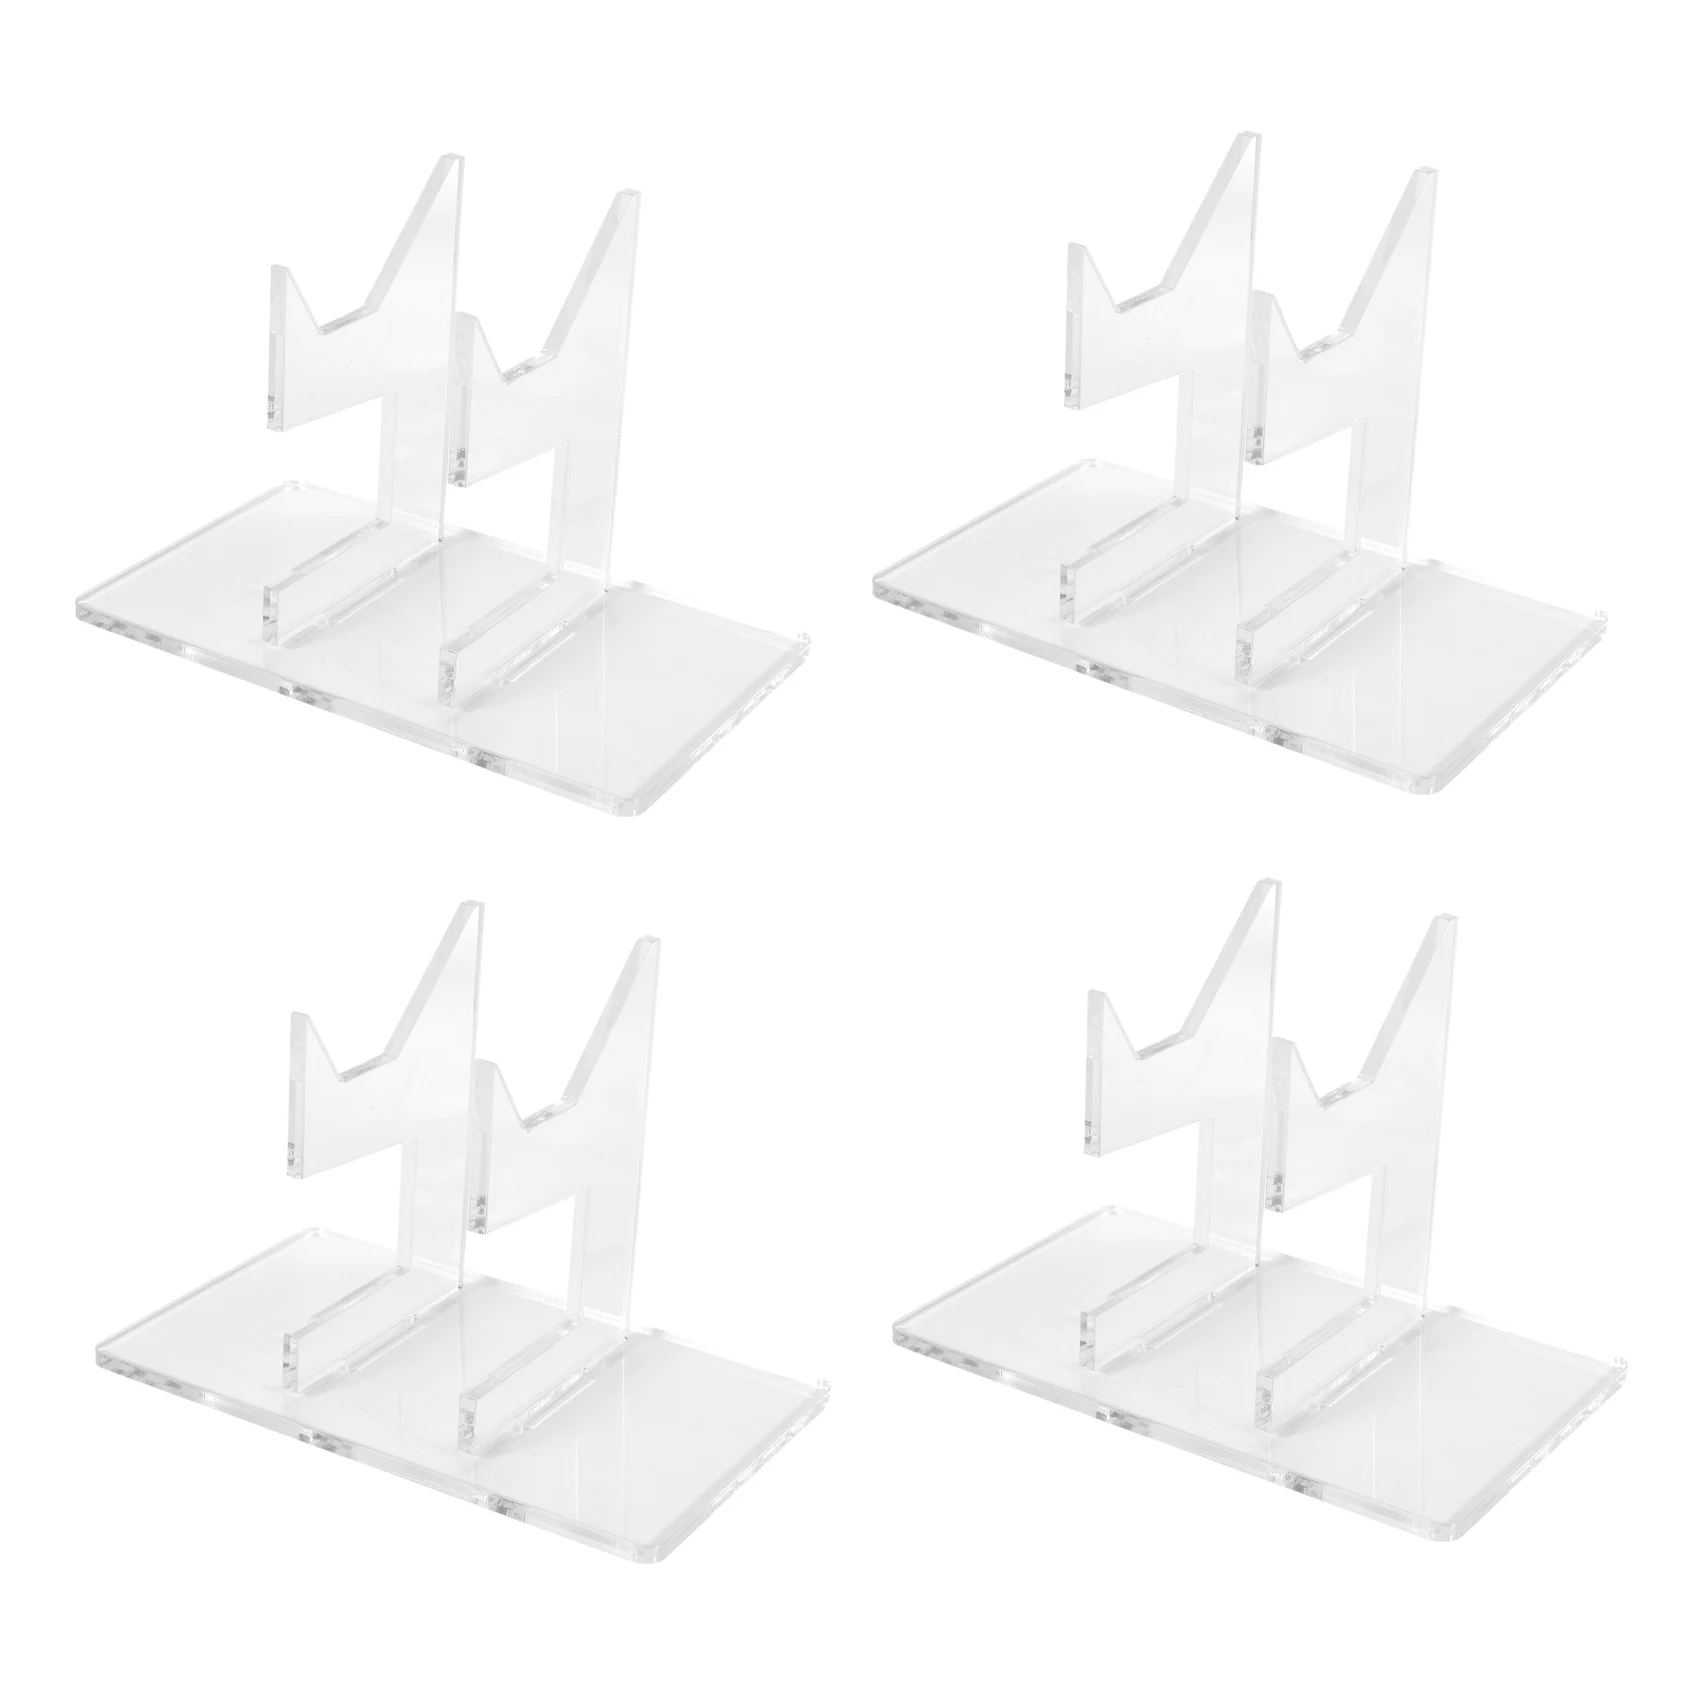 

4X Universal Controller Stand Holder, Fits Modern and Retro Game Controllers, Perfect Display and Organization